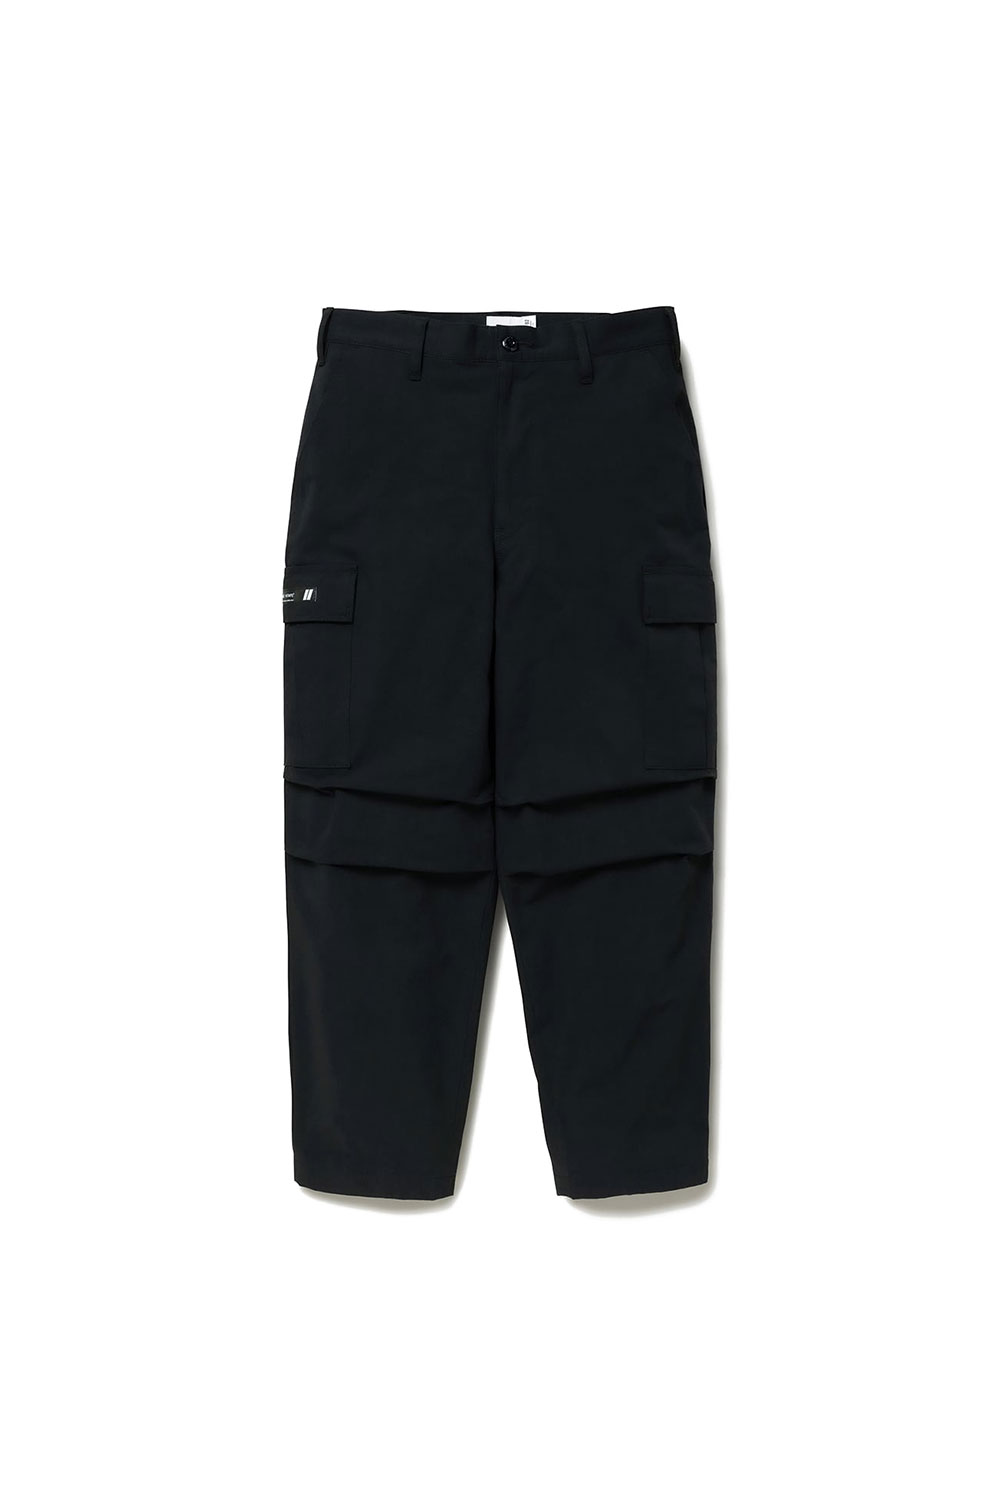 MILT9601 / TROUSERS / NYCO. RIPSTOP / BLACK (231WVDT-PTM09 